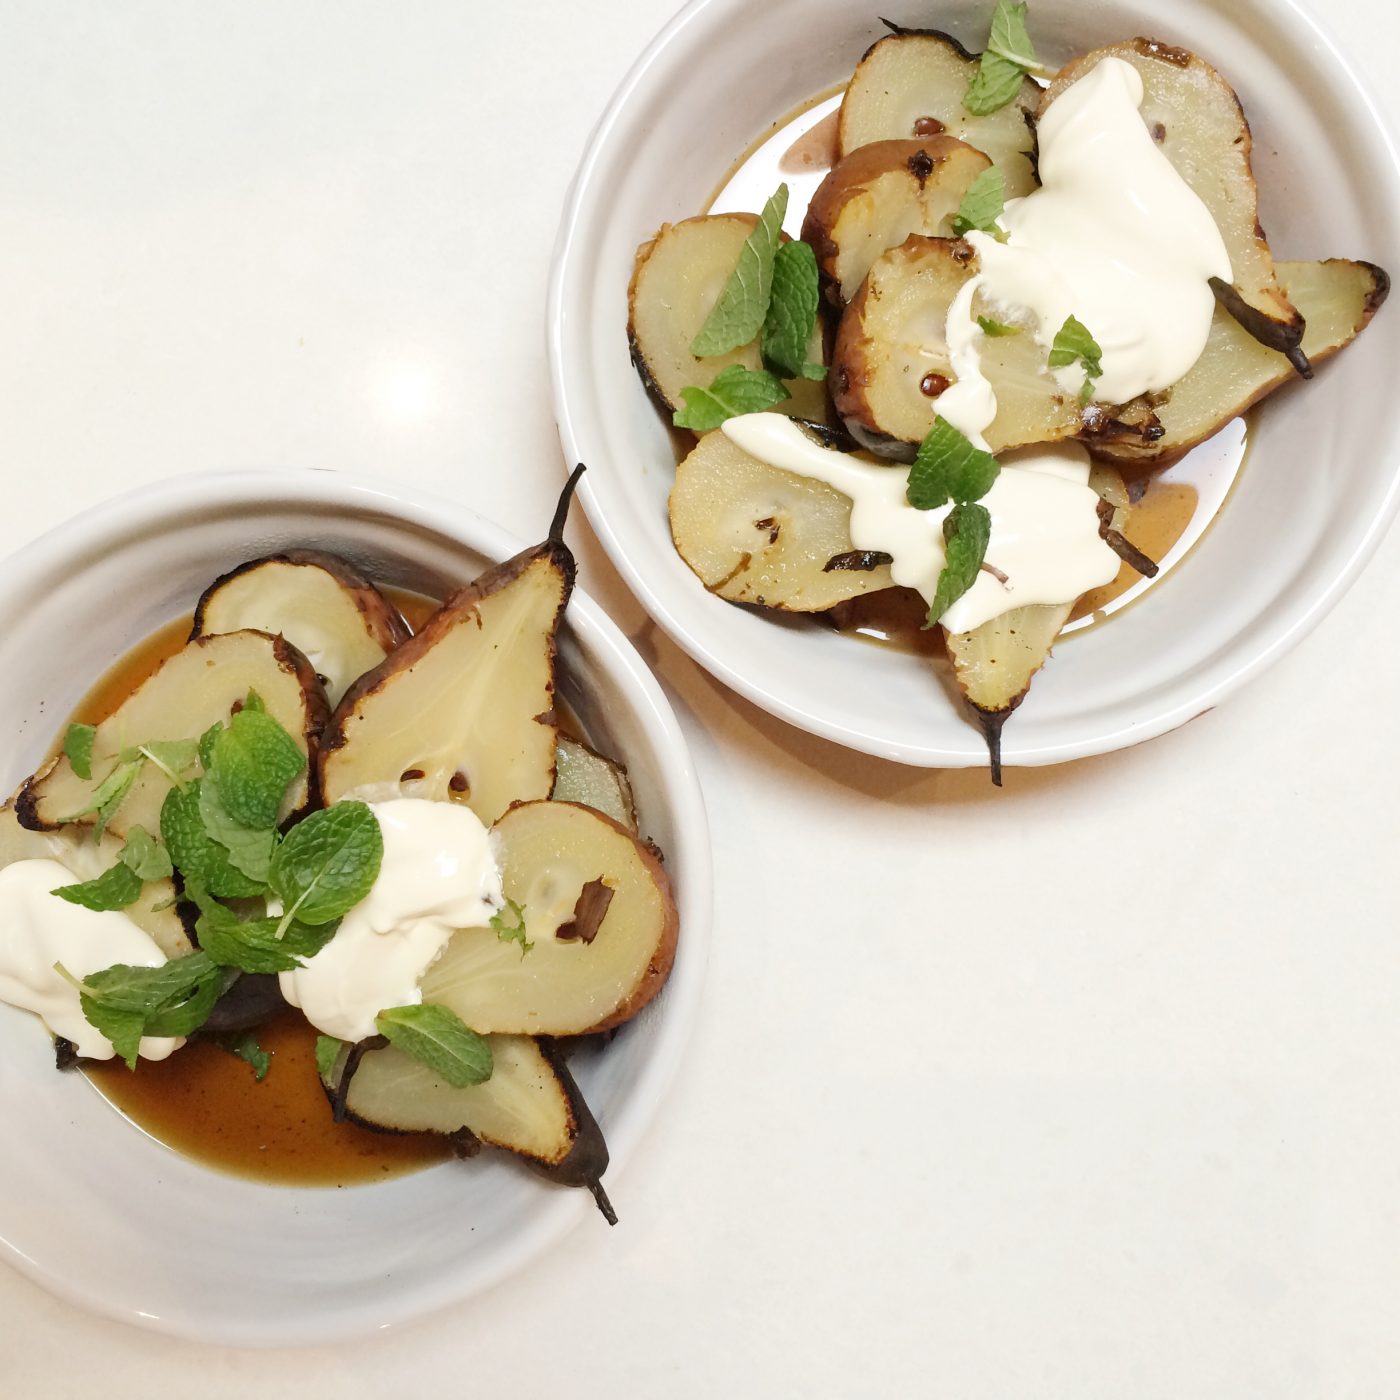 , Barbecued pears recipe and great tips for cooking on the barbecue